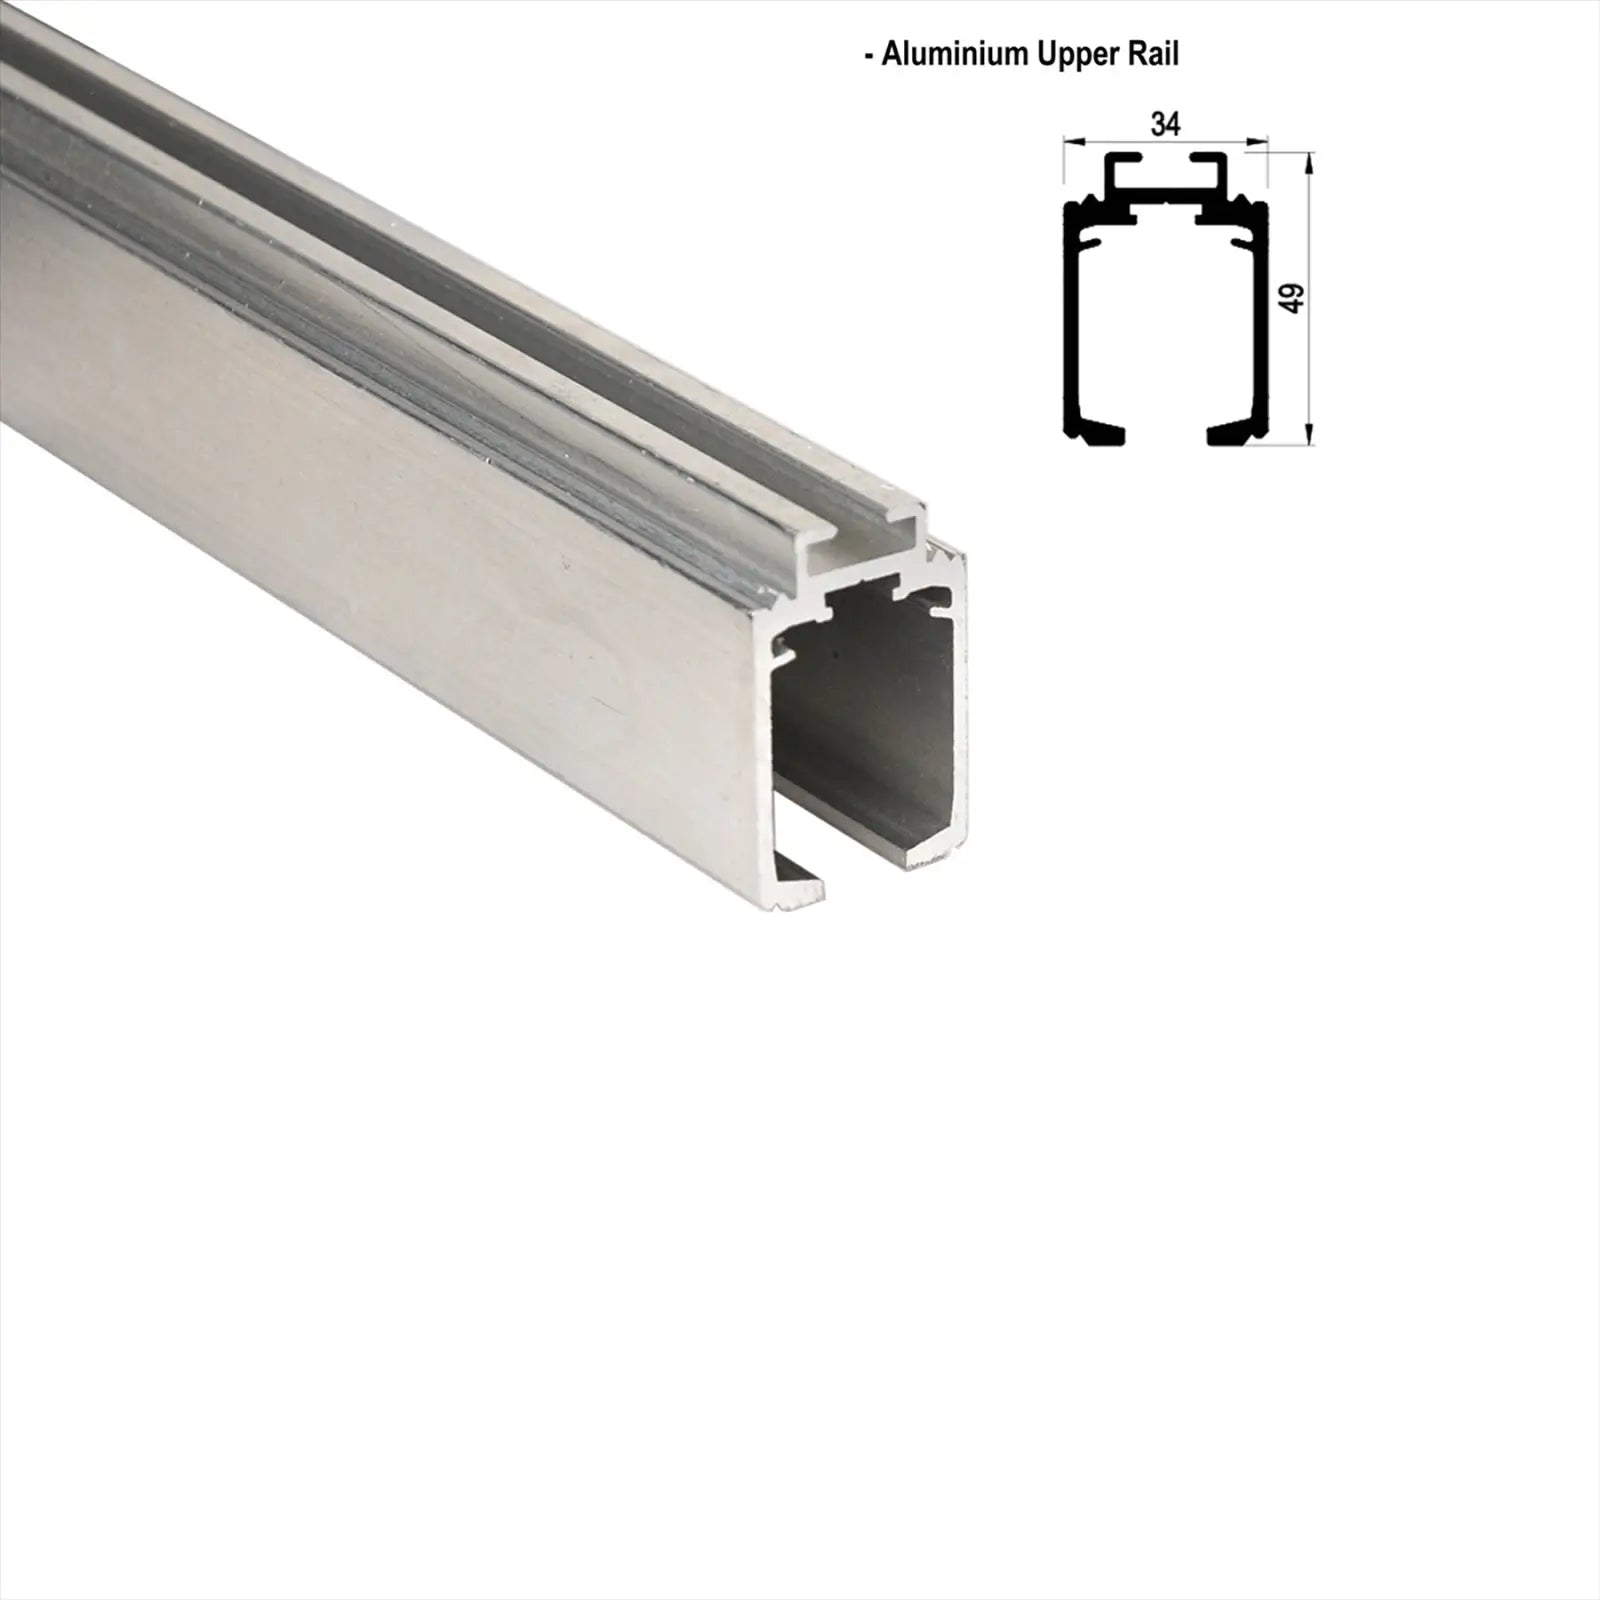 DS-Slide Double Synchro Sliding Door Kit - 2400mm Track - One Way Soft Close - Decor And Decor